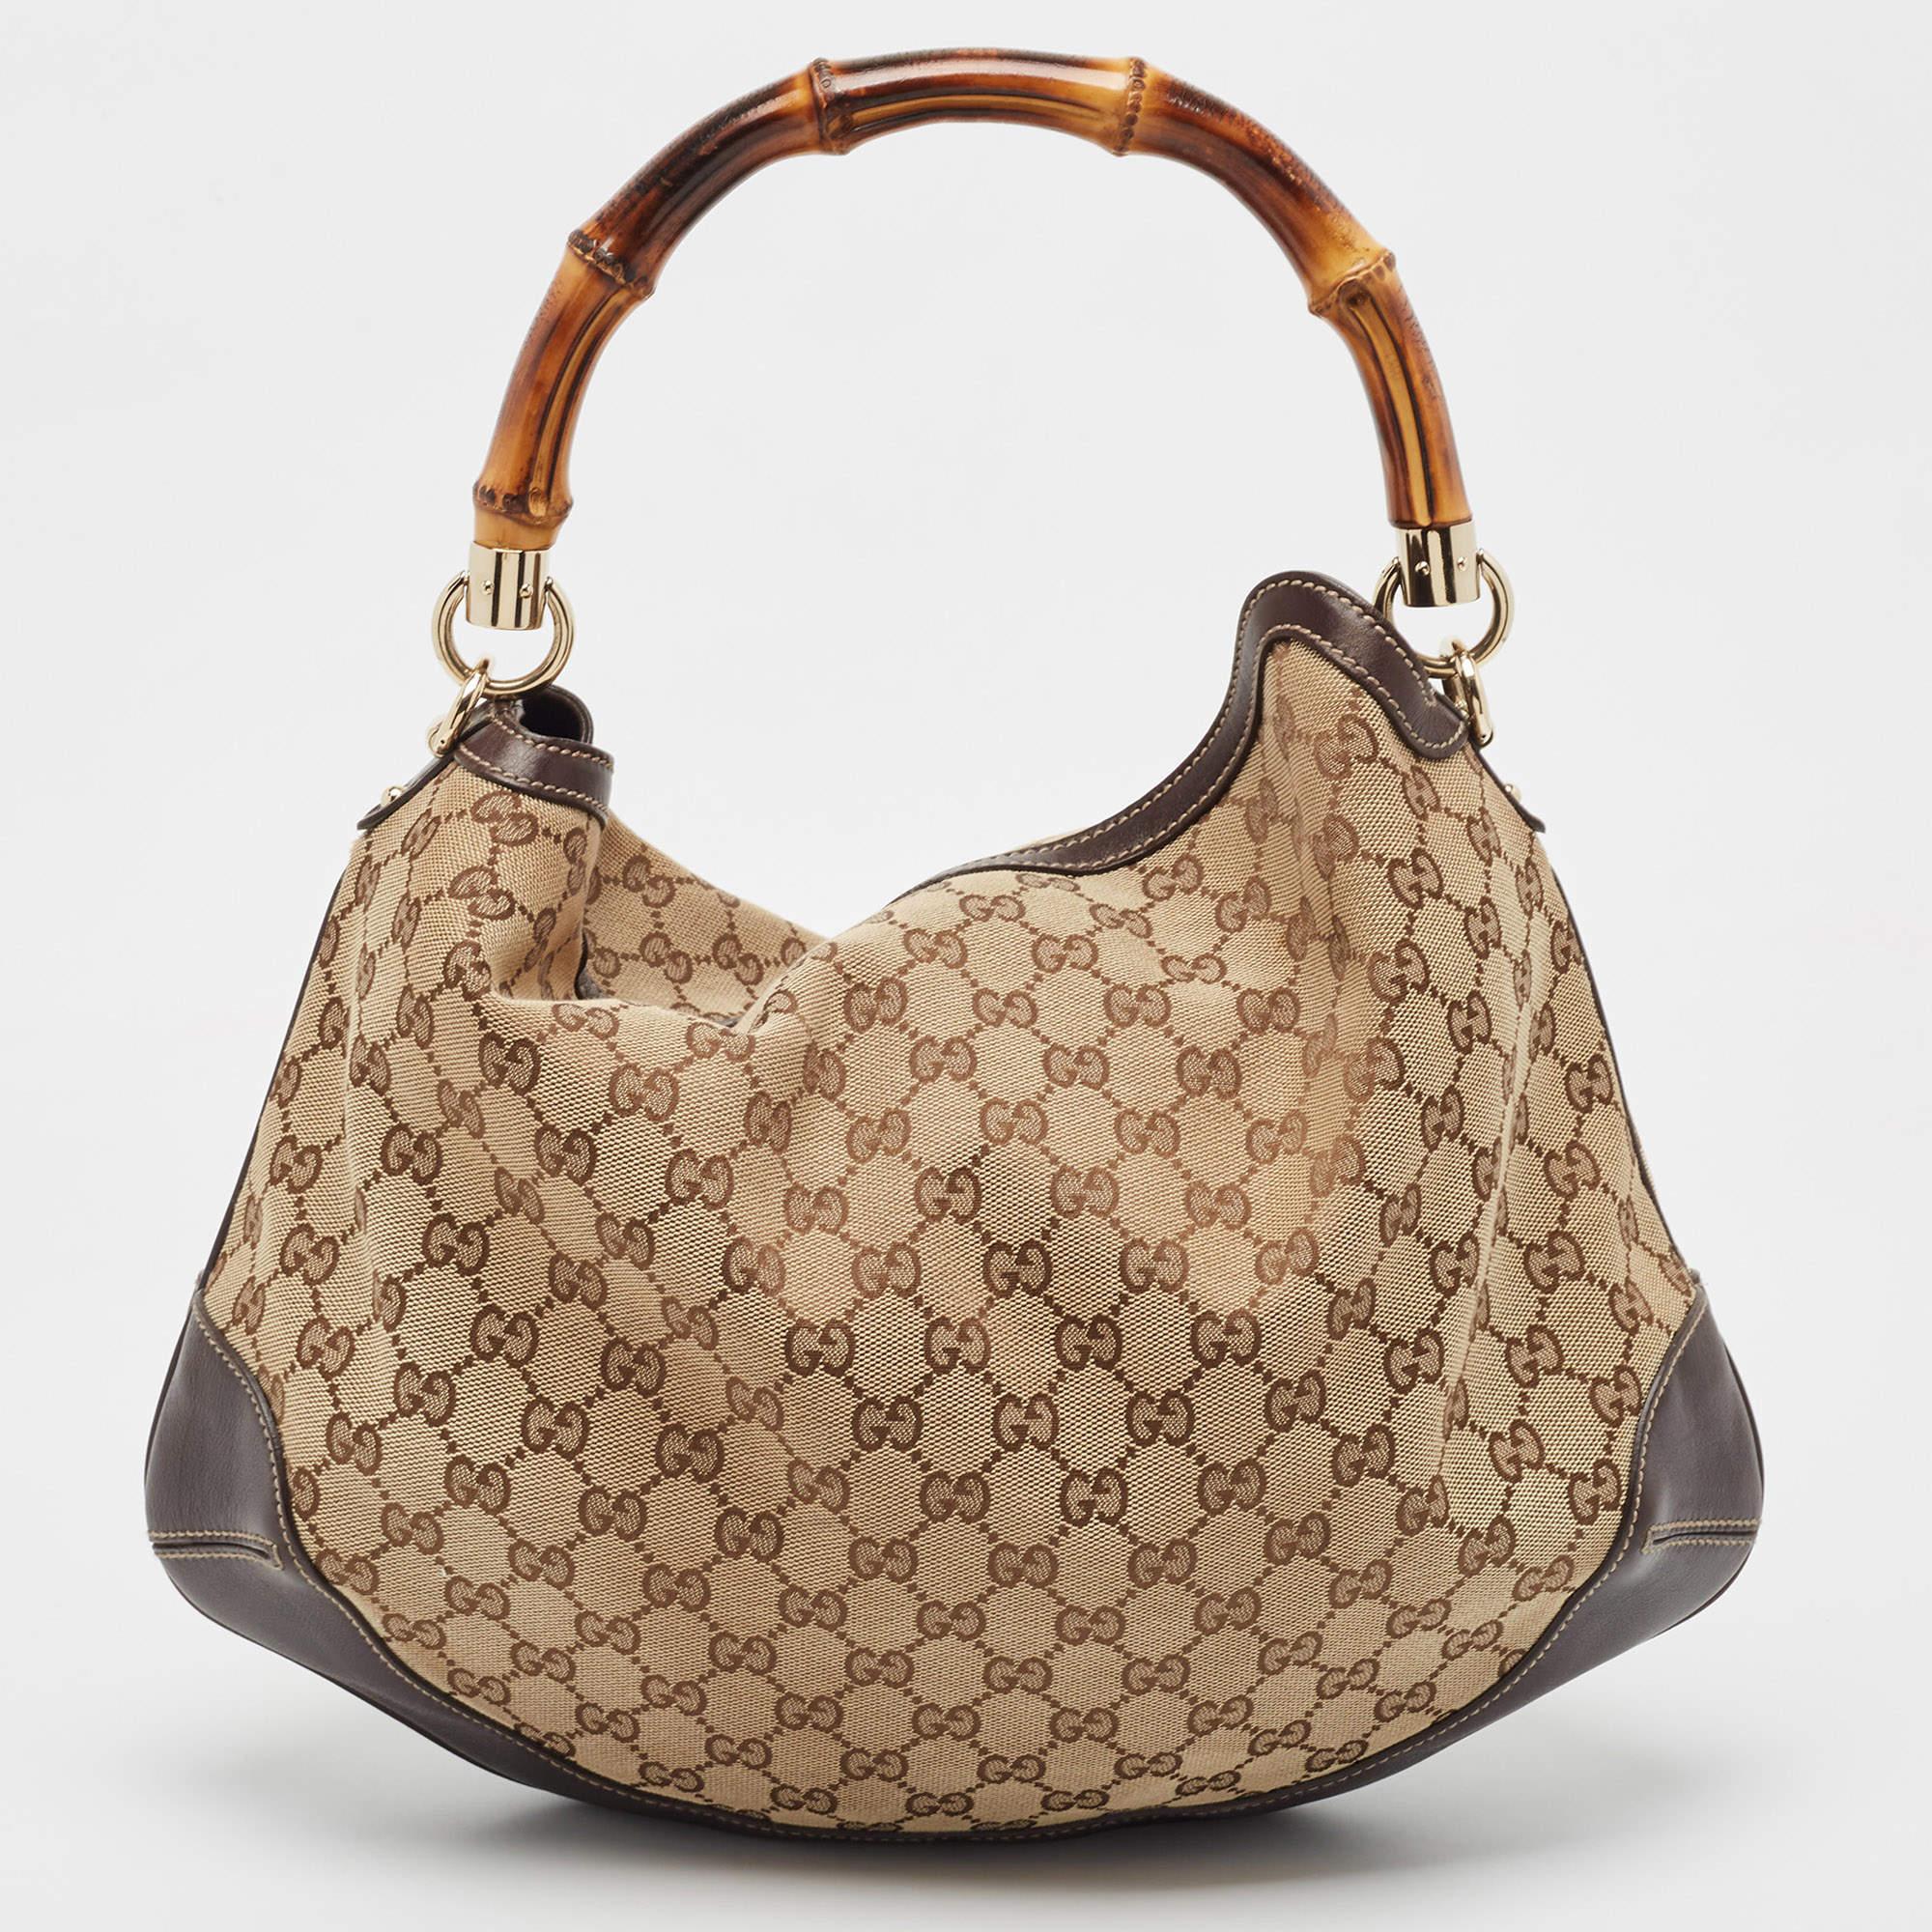 With a Gucci bag by your side, it's going to be a stylish OOTD, no matter the day. Here, we have this Gucci Bamboo shoulder bag just for you. Its spacious shape, heritage details, and simple elegance make it a worthy purchase and a versatile